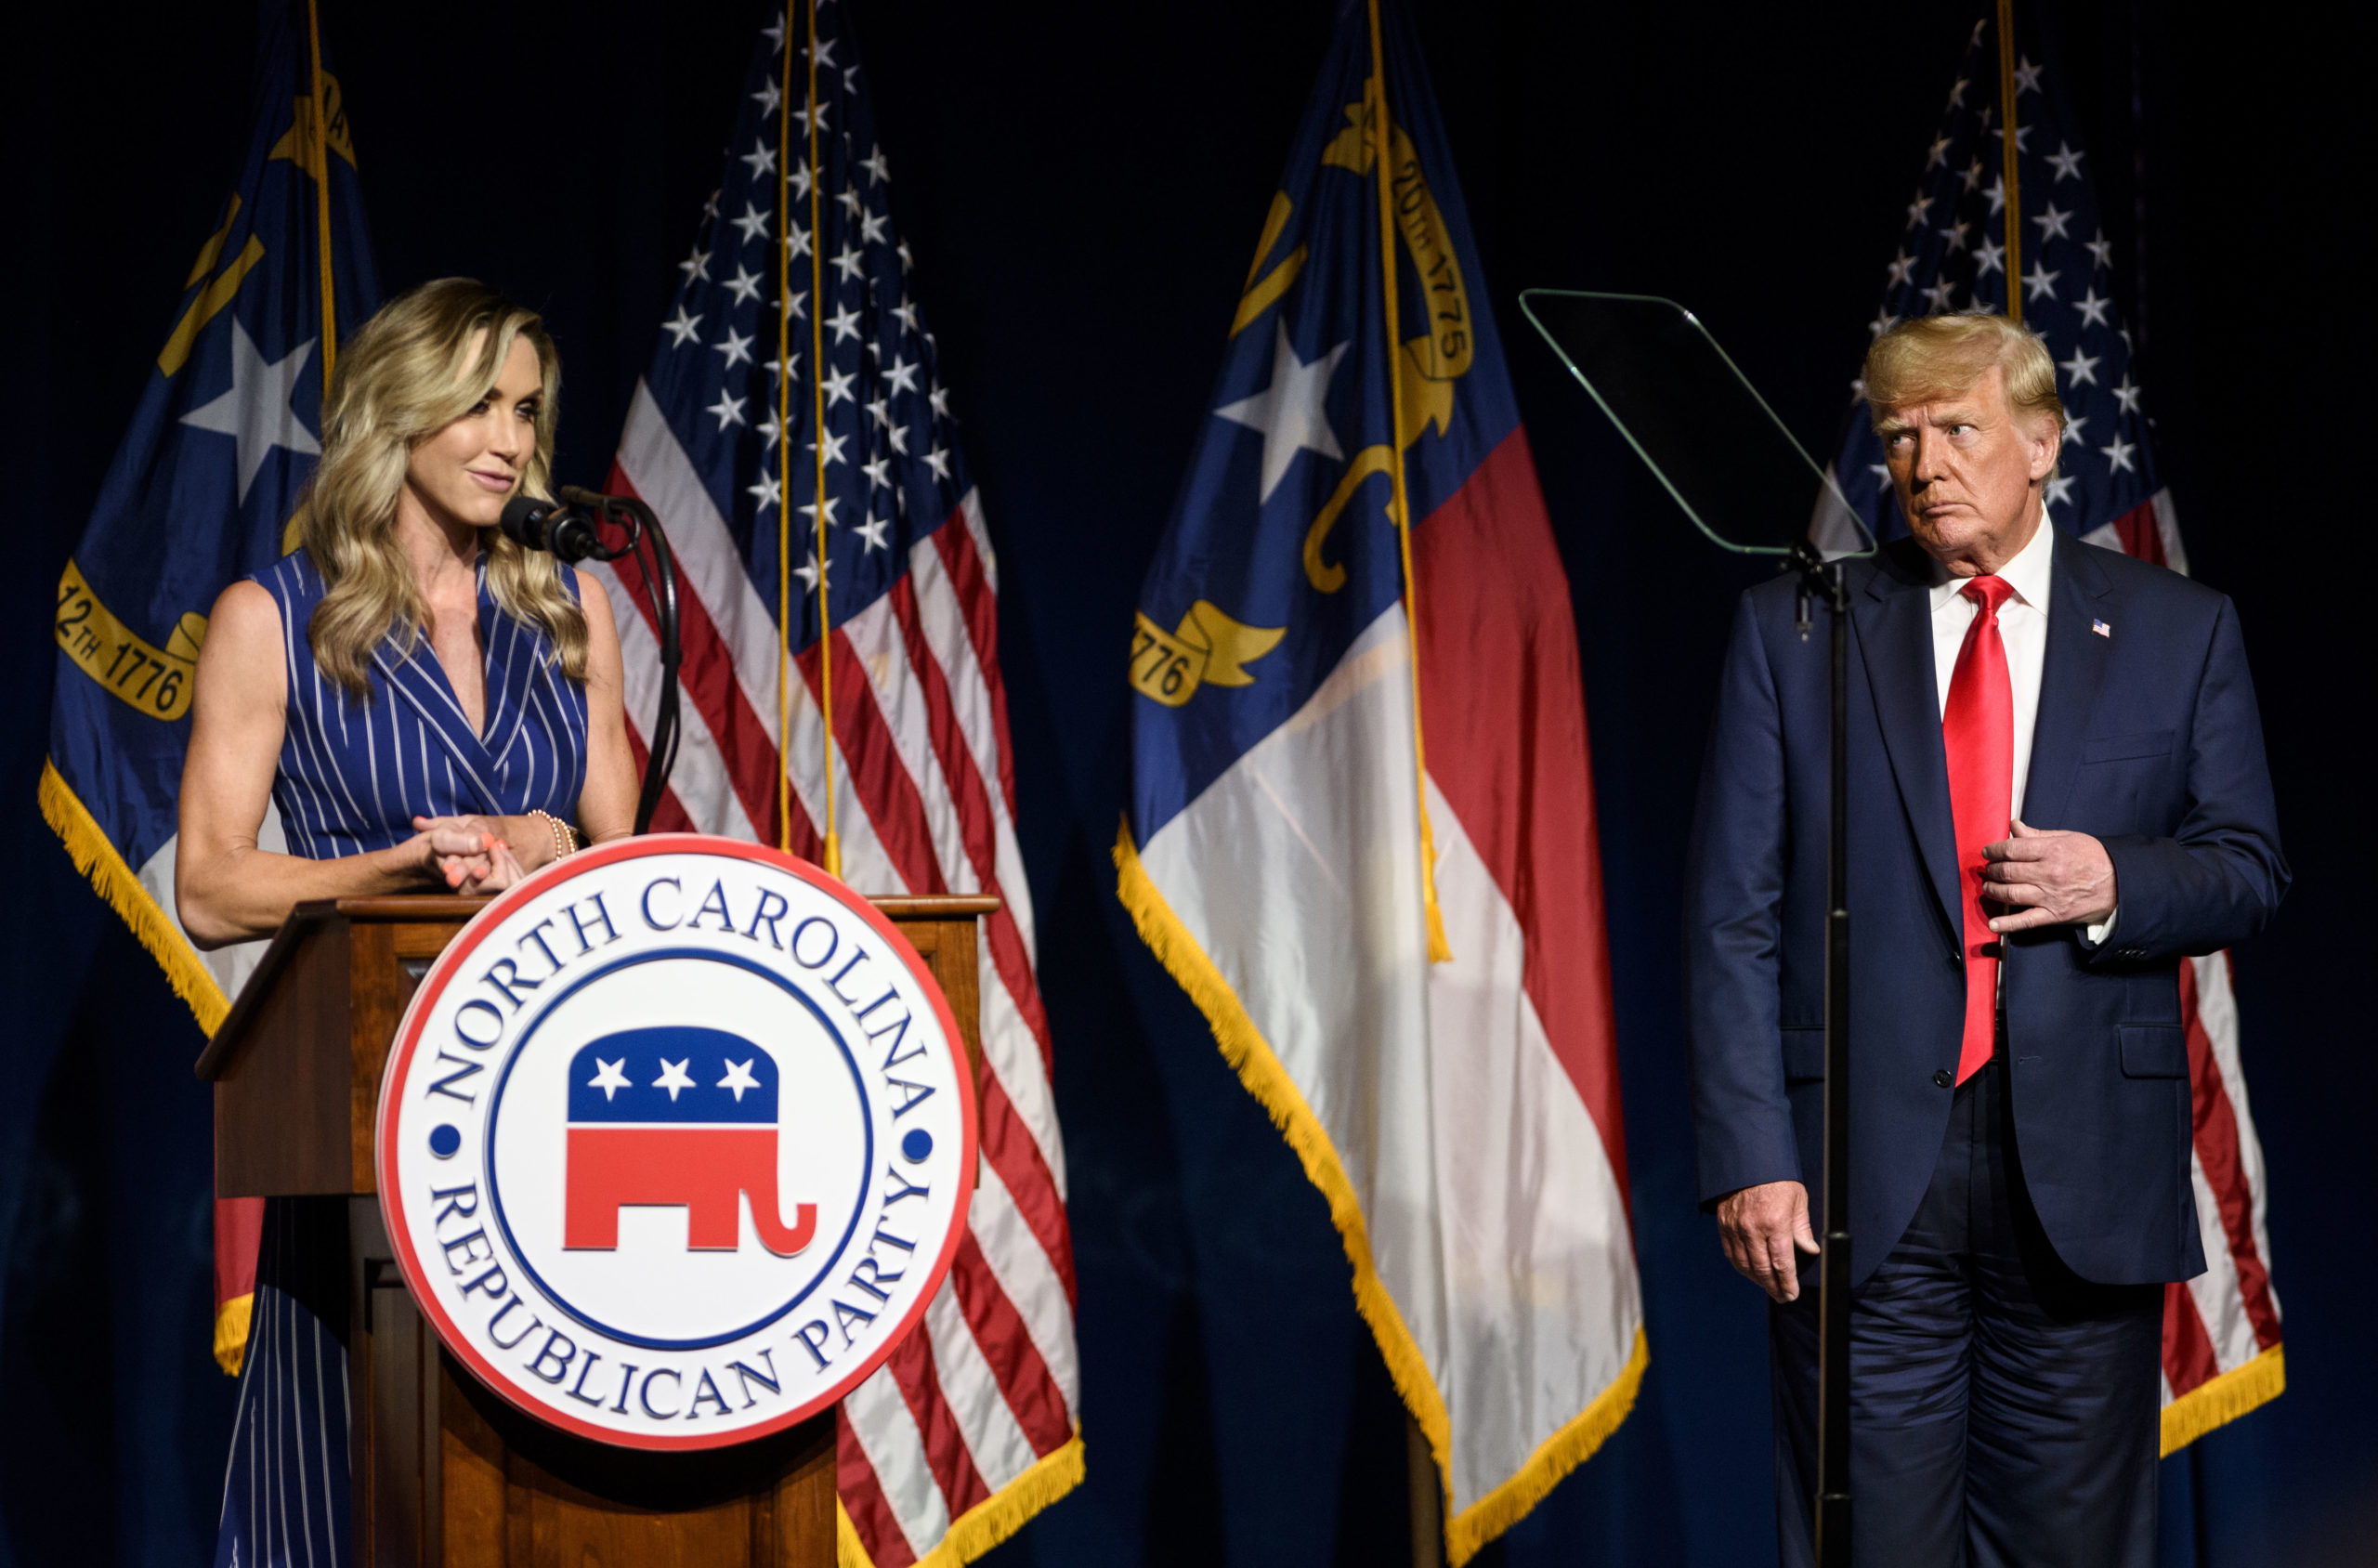 GREENVILLE, NC - JUNE 05: Laura Trump speaks at the NCGOP state convention as former U.S. President Donald Trump on June 5, 2021 in Greenville, North Carolina. Laura Trump put rumors to bed by announcing she would not be running for the N.C. Senate. The event is one of former U.S. President Donald Trumps first high-profile public appearances since leaving the White House in January. (Photo by Melissa Sue Gerrits/Getty Images)